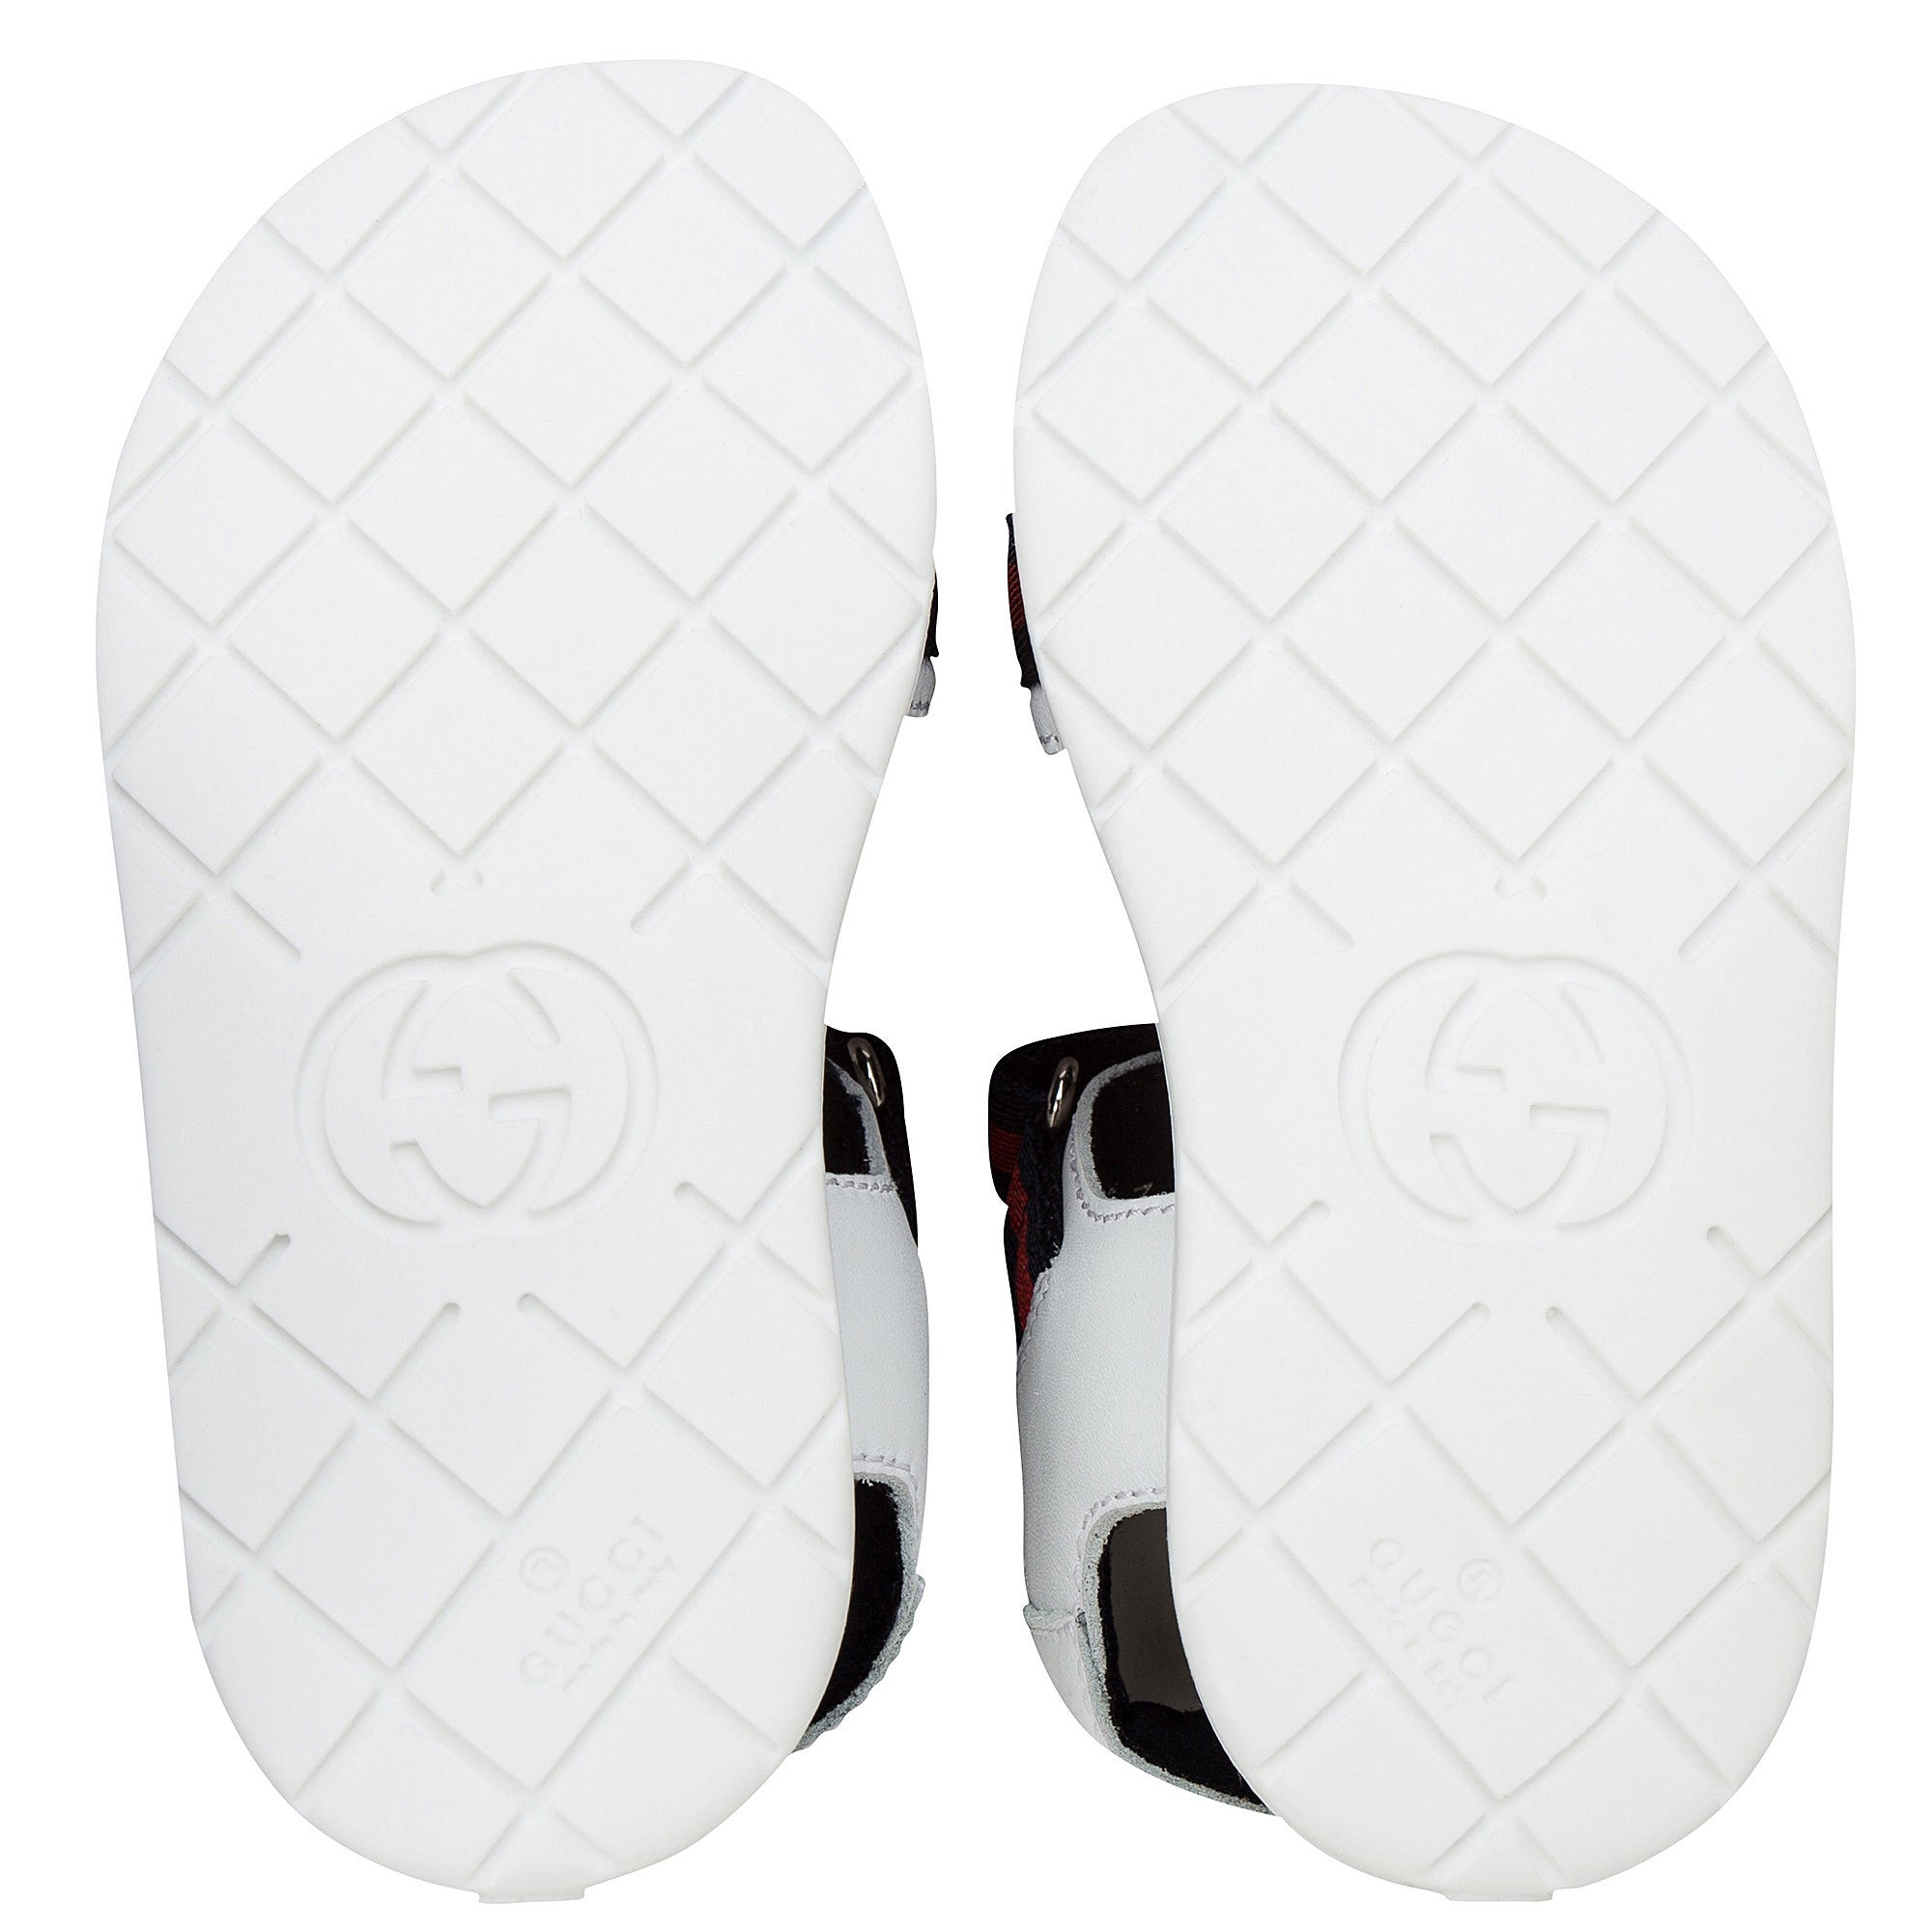 Baby  White Leather Upper Rubber Sole Sandals